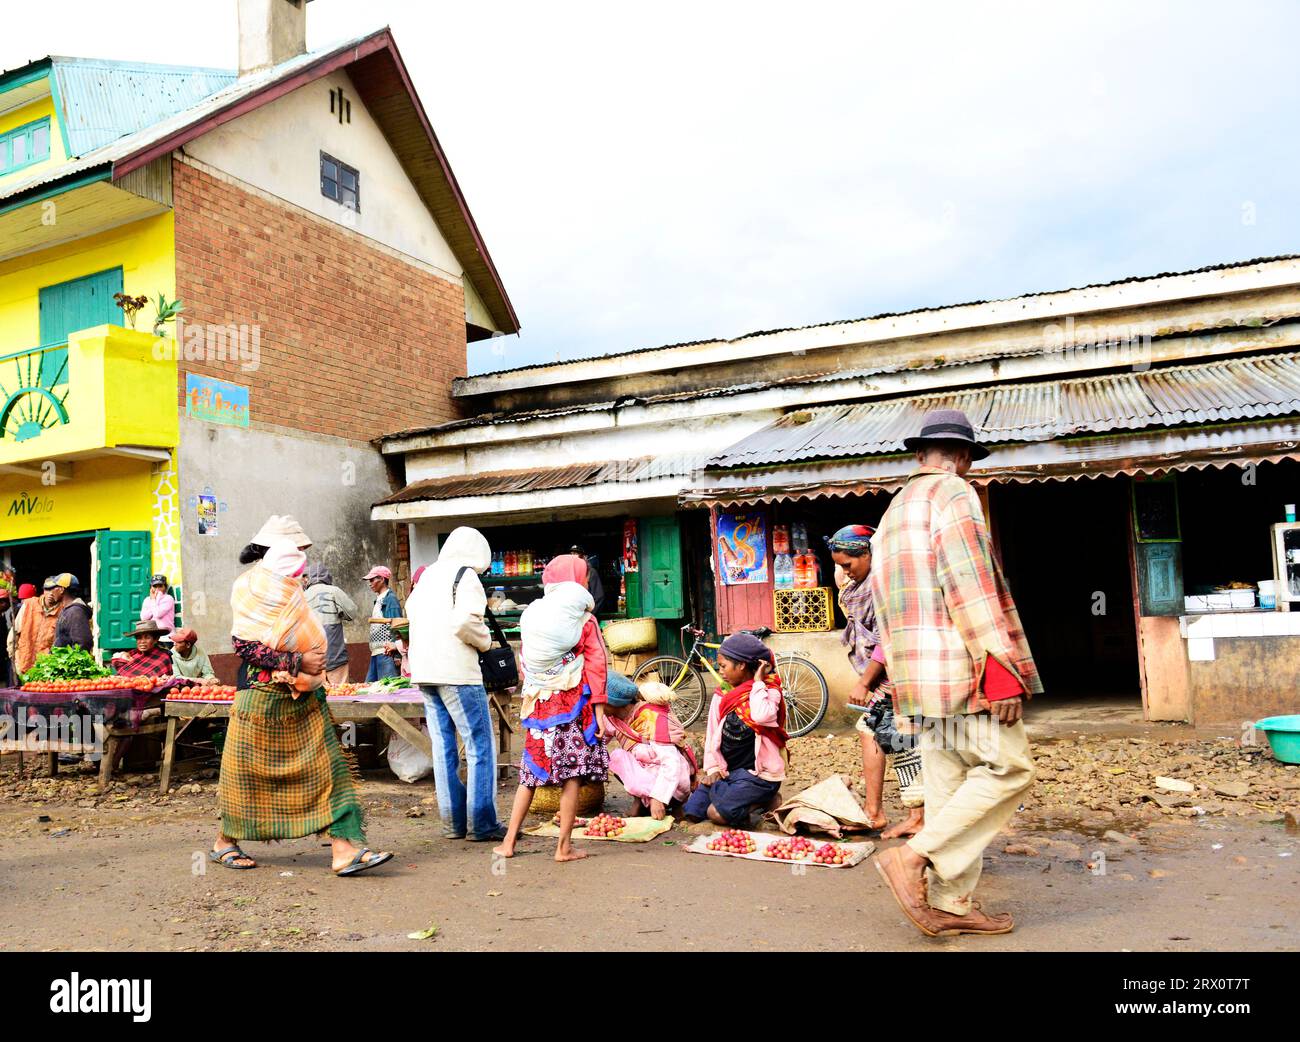 A colorful rural market in central Madagascar. Stock Photo